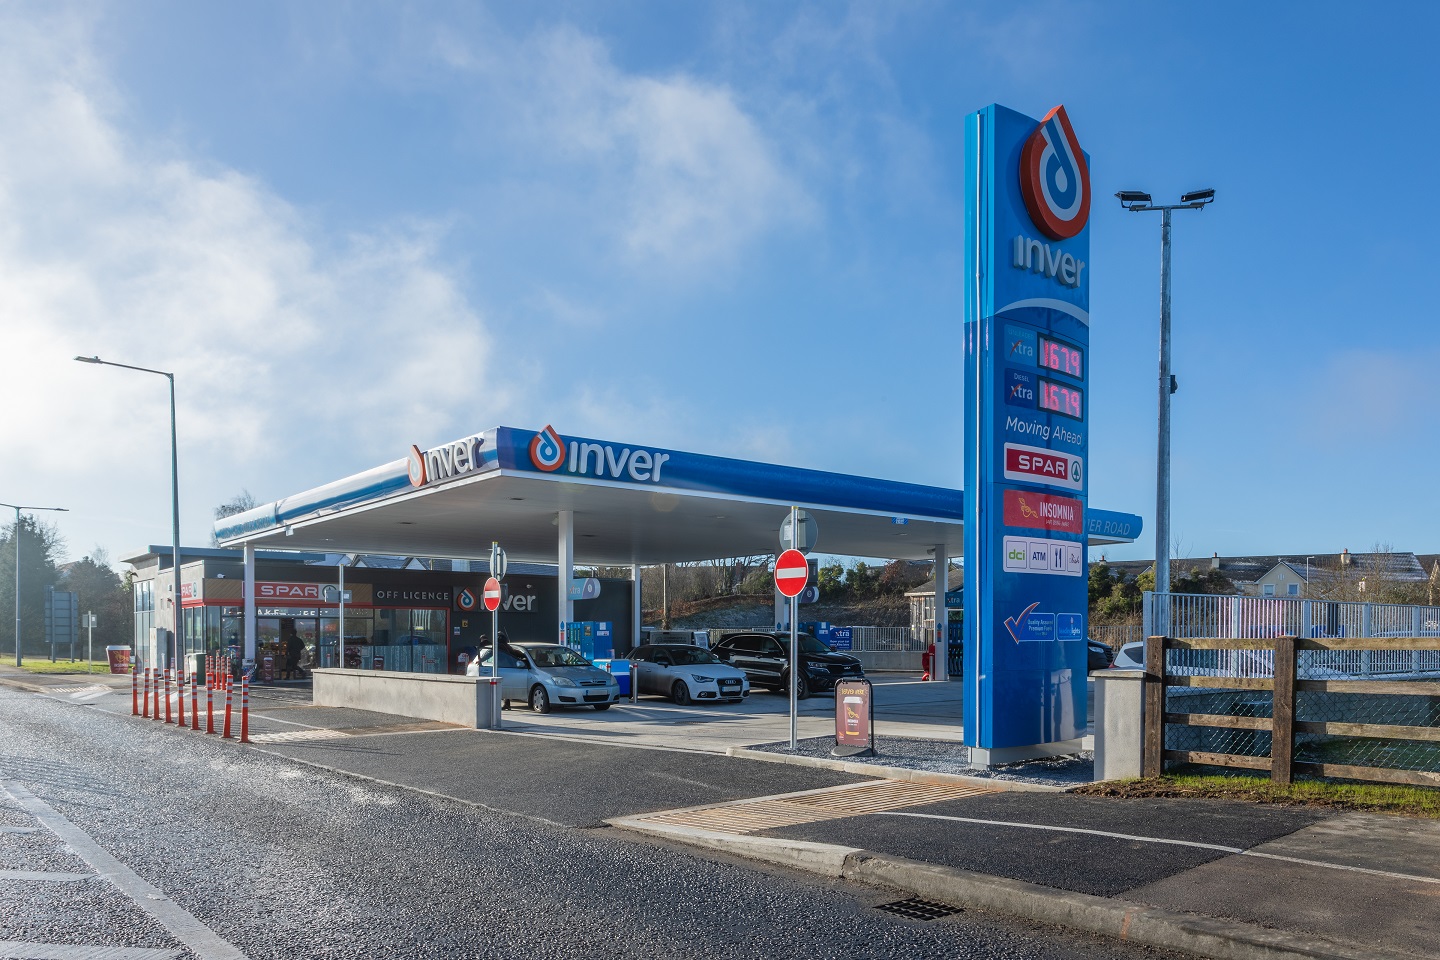 New Inver station opens in Castlecomer, Kilkenny